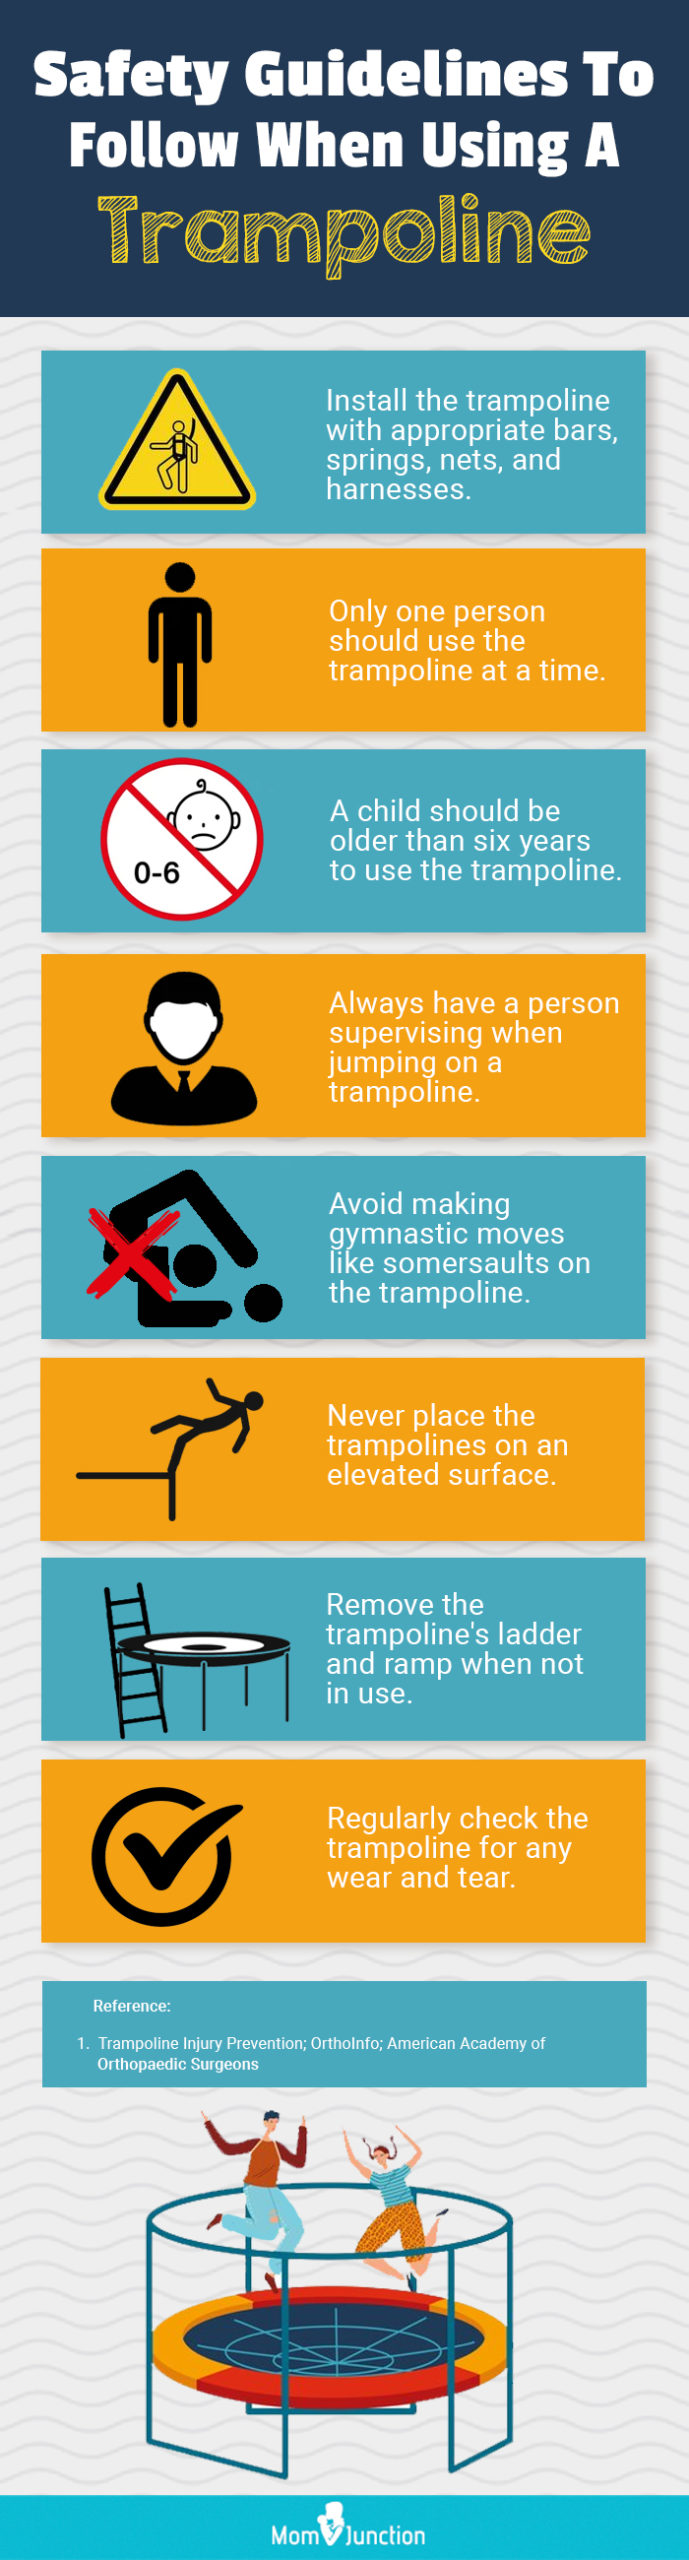 Safety Guidelines To Follow When Using A Trampoline